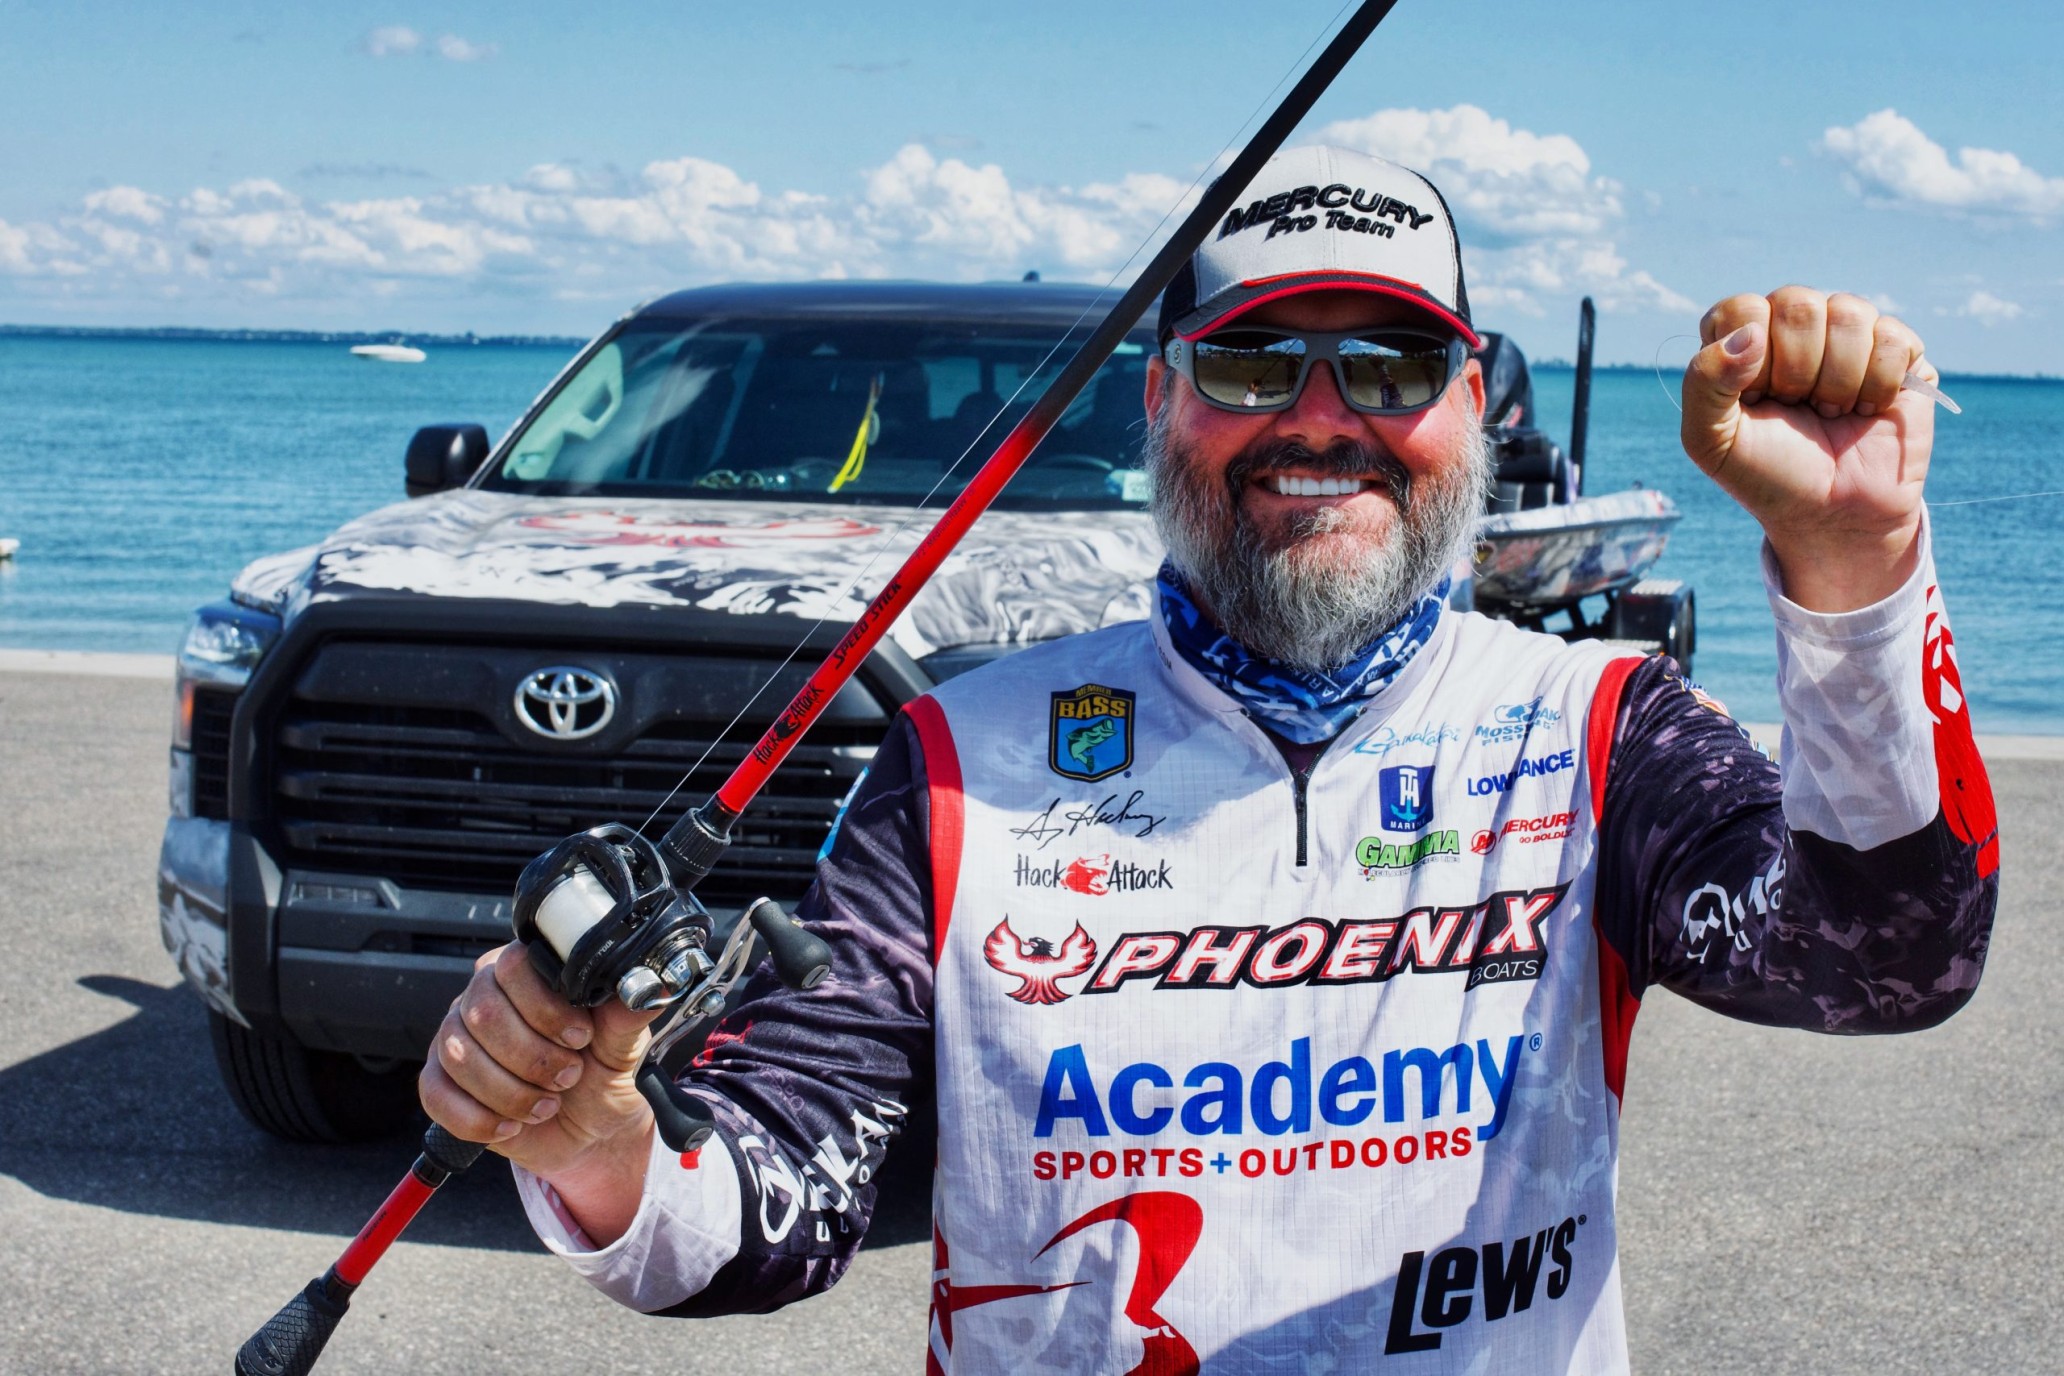 SEAGUAR UNVEILS NEW TACTX™ CAMO BRAIDED LINE – Anglers Channel